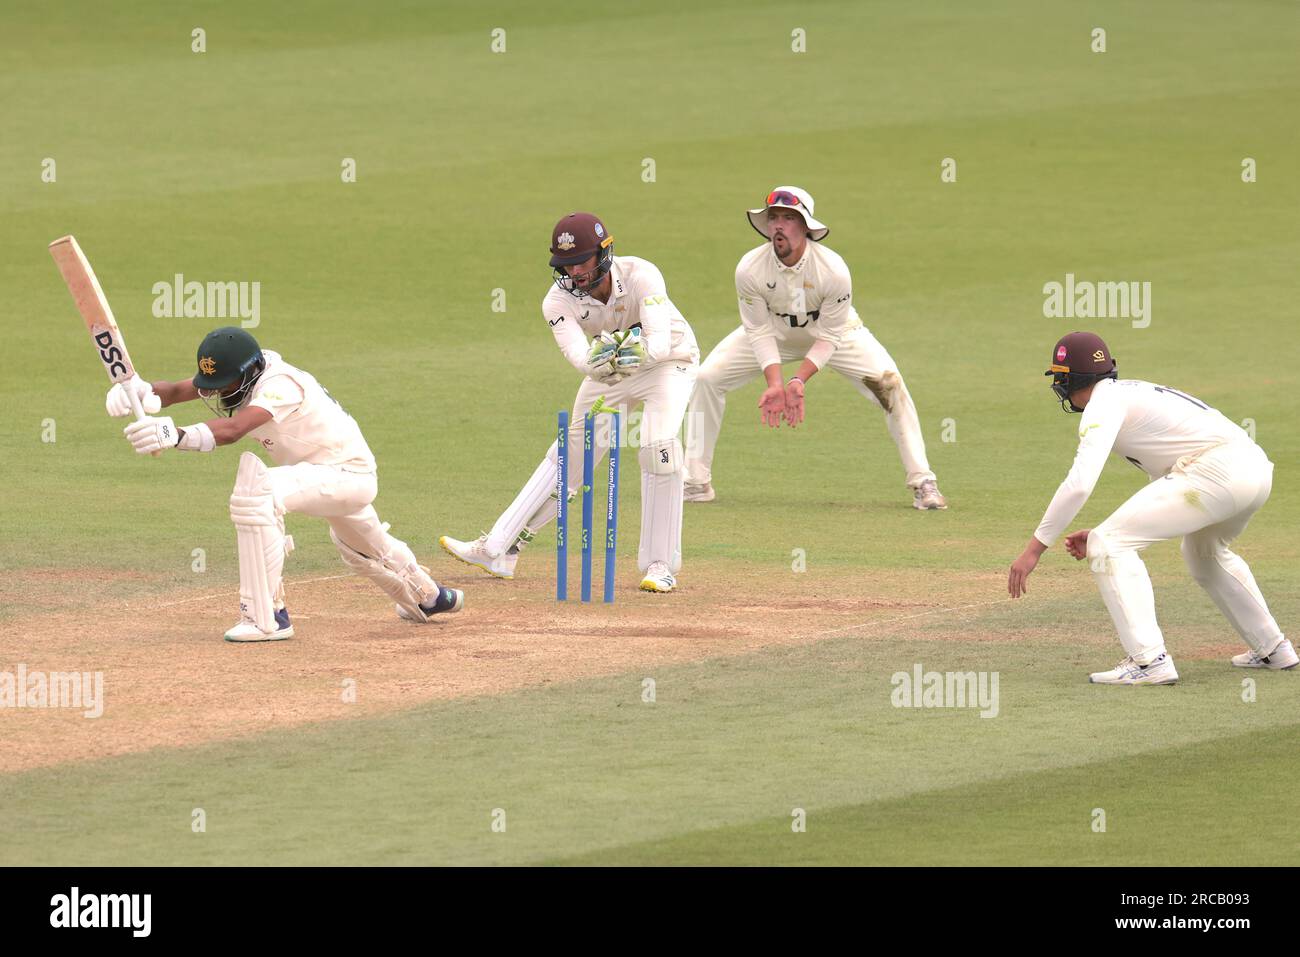 London, UK. 13th July, 2023. Quick work by Ben Foakes but Haseeb Hameed keeps his back foot well anchored as Surrey take on Nottinghamshire in the County Championship at the Kia Oval, day four. Credit: David Rowe/Alamy Live News Stock Photo